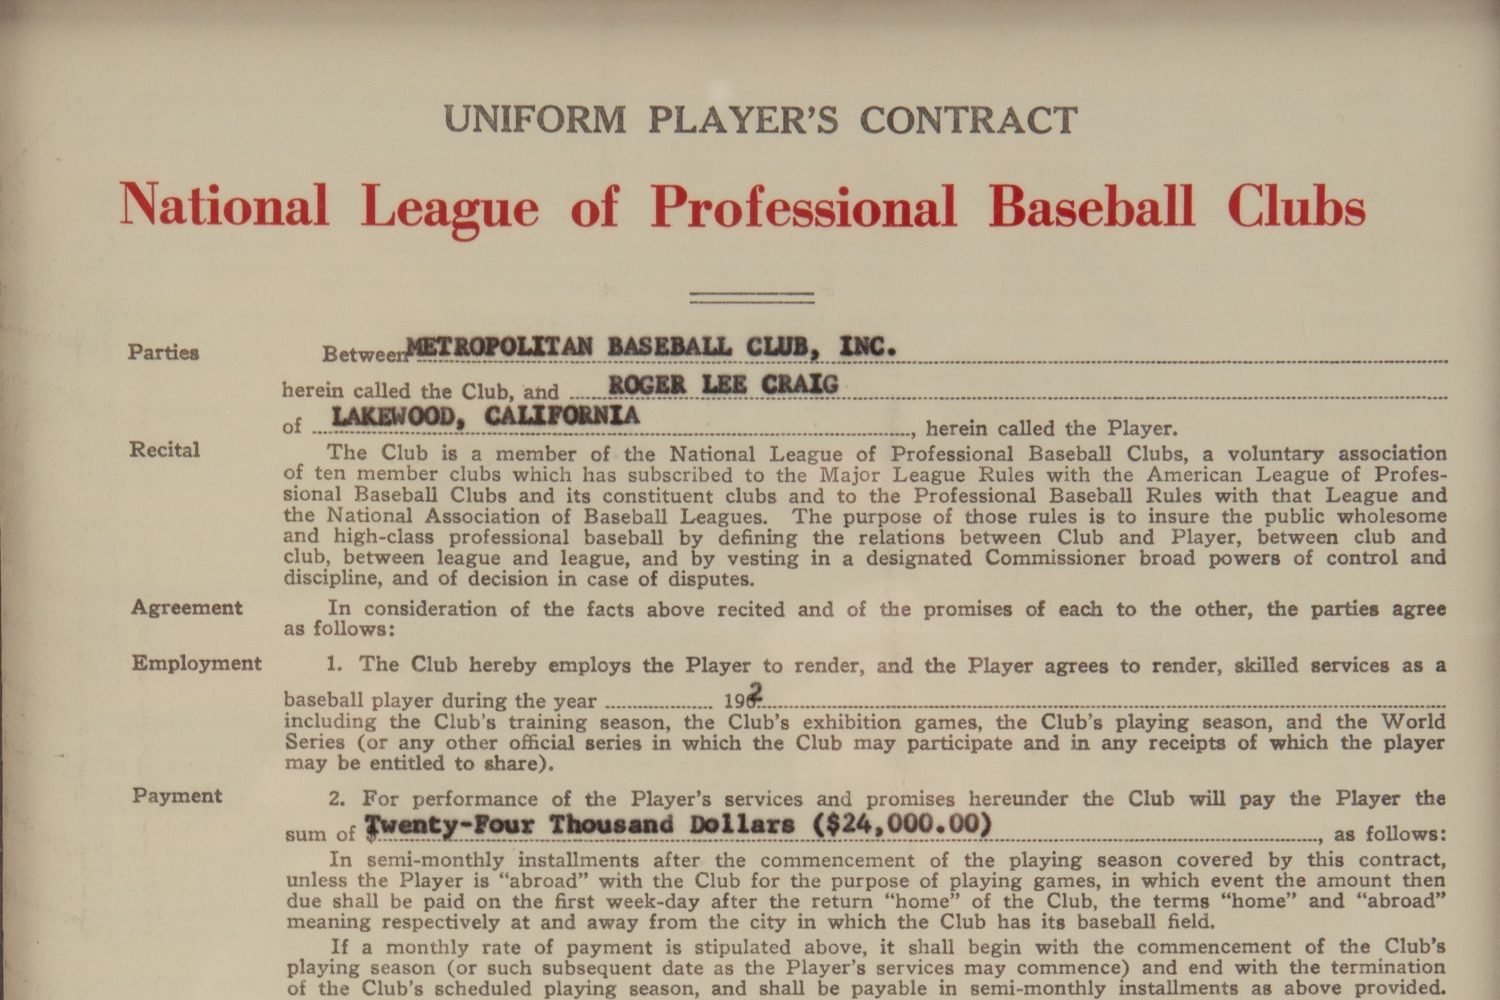 Roger Craig Contract with the New York Mets in Frame